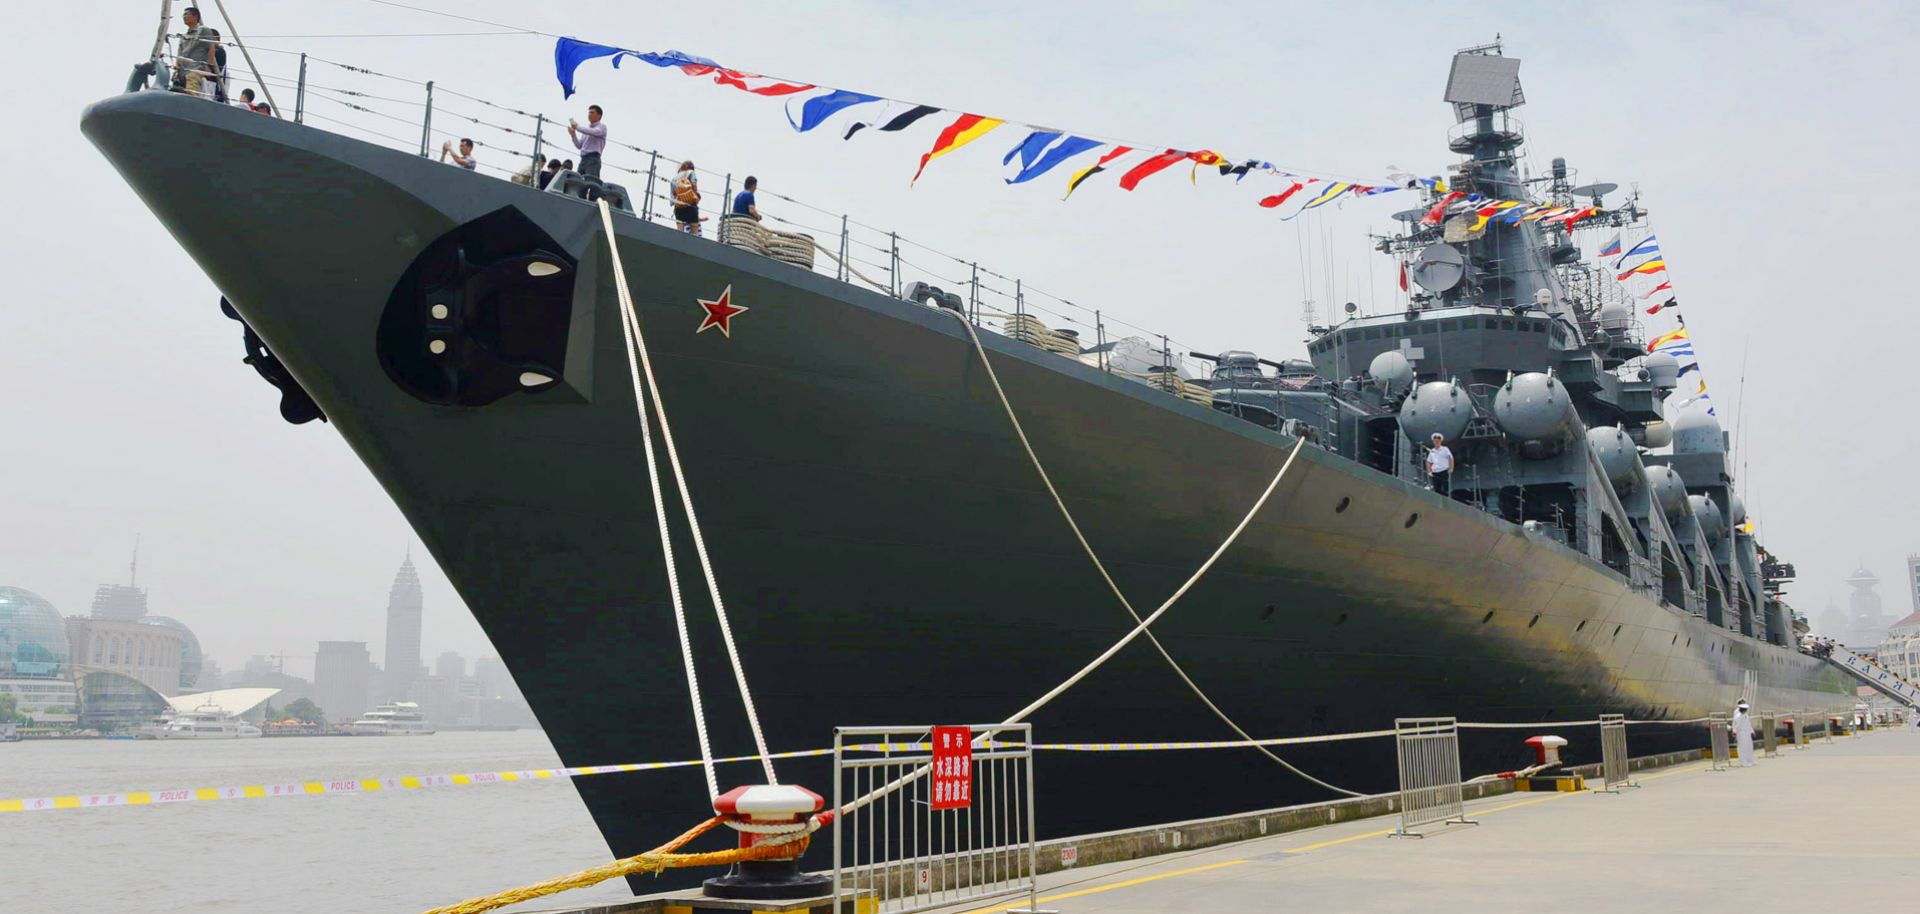 Russian guided missile cruiser Varyag in a port in Shanghai after taking part in a joint military drill with China in 2014. During the Cold War, the Russian Pacific Fleet was a defensive force, completely outmatched by the naval forces of the United States. Russia plans to bolster its Pacific naval forces over the next decade.